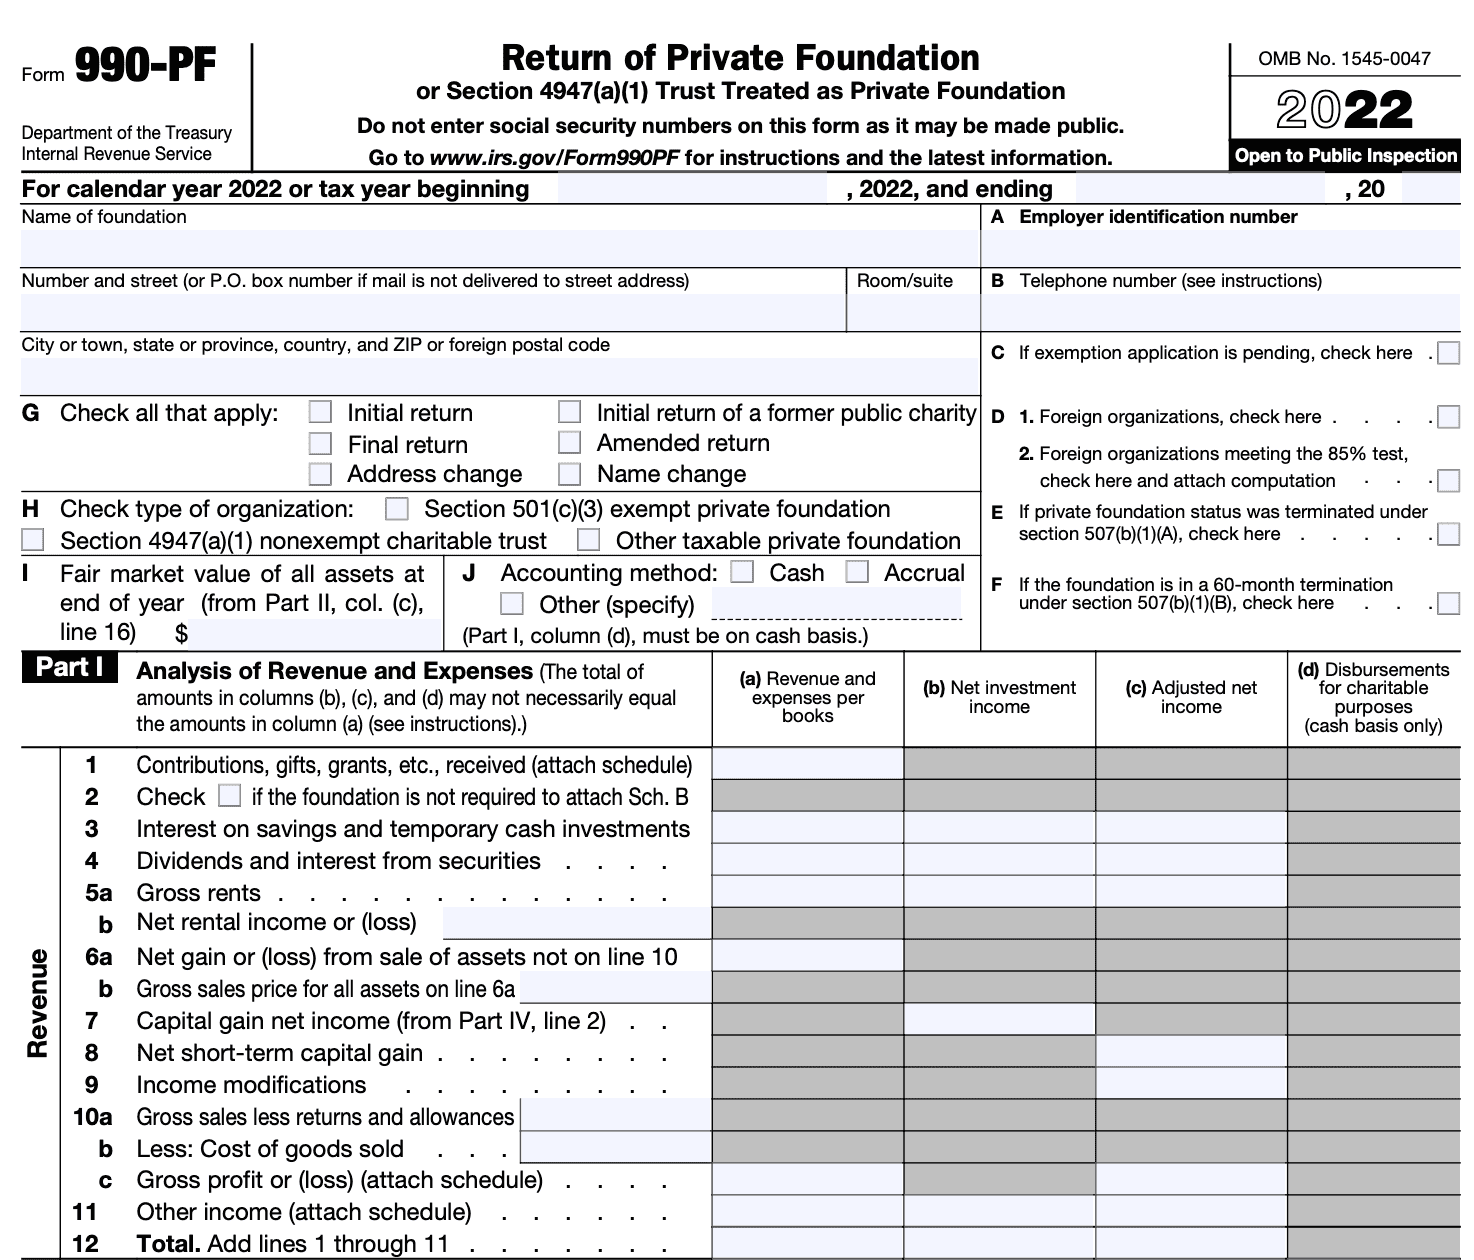 form-990-pf-1.png